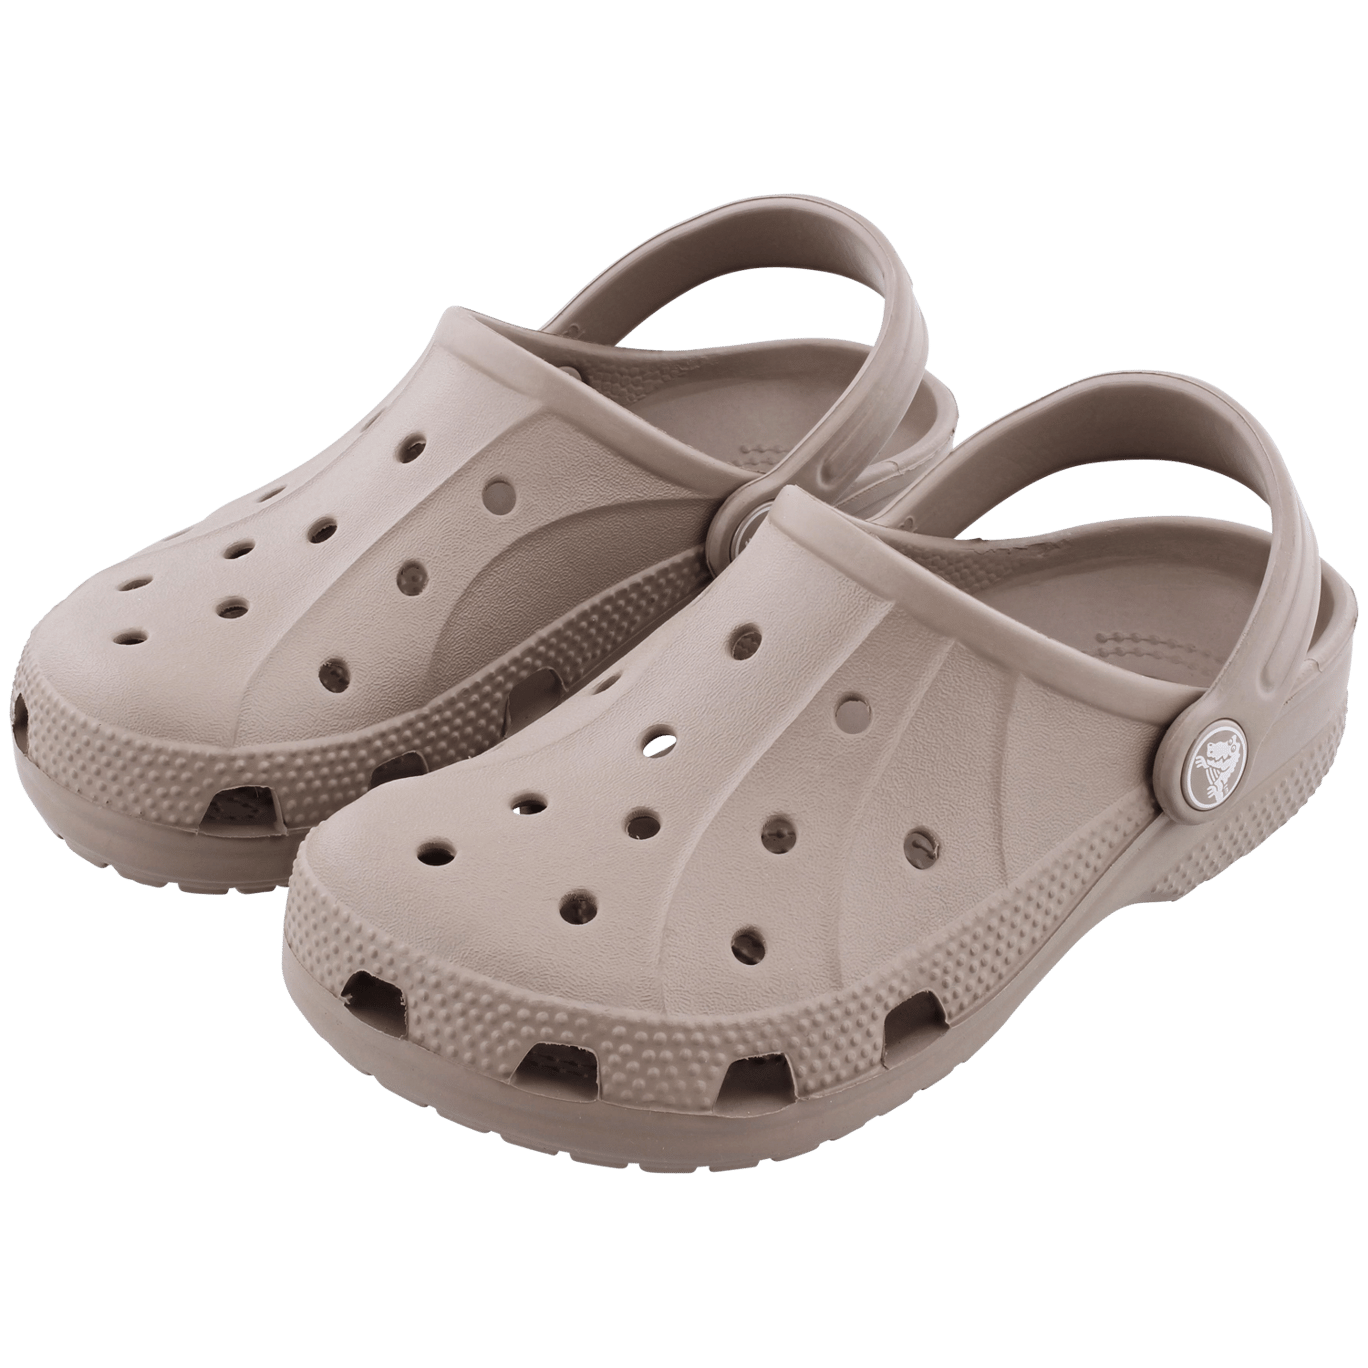 List 96+ Background Images Show Me Pictures Of Crocs Stunning